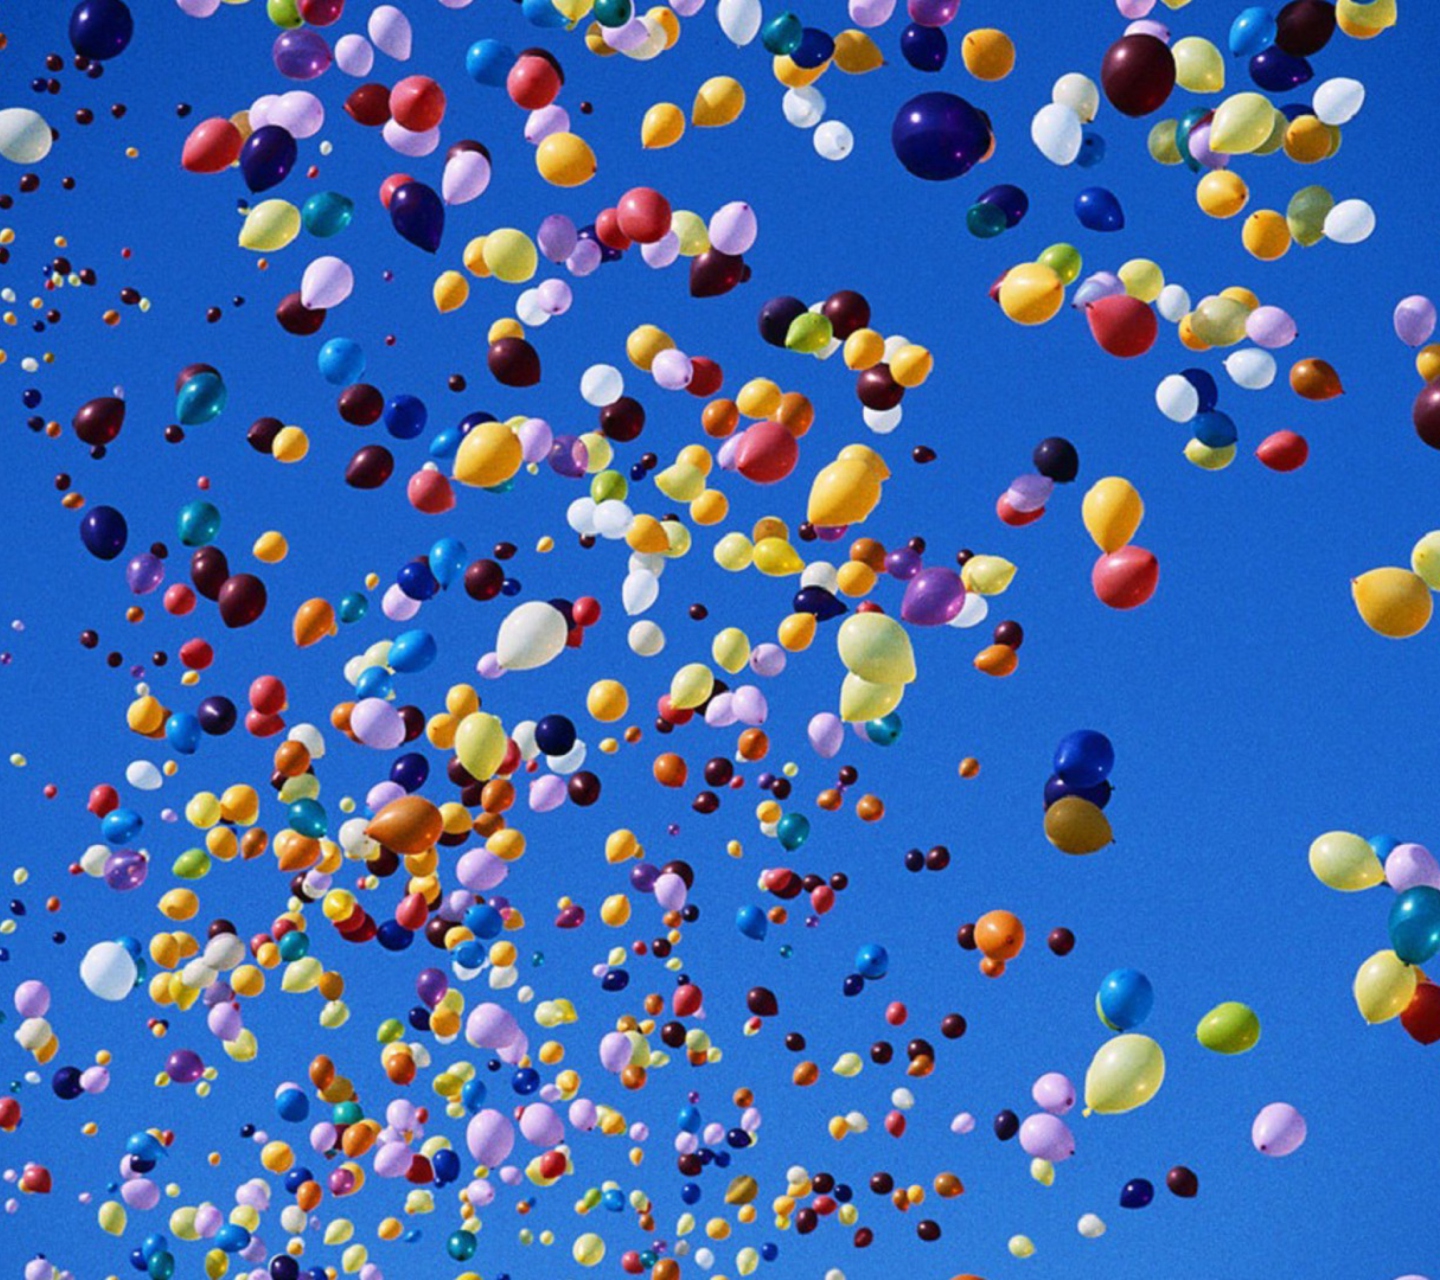 Colorful Balloons In Blue Sky wallpaper 1440x1280